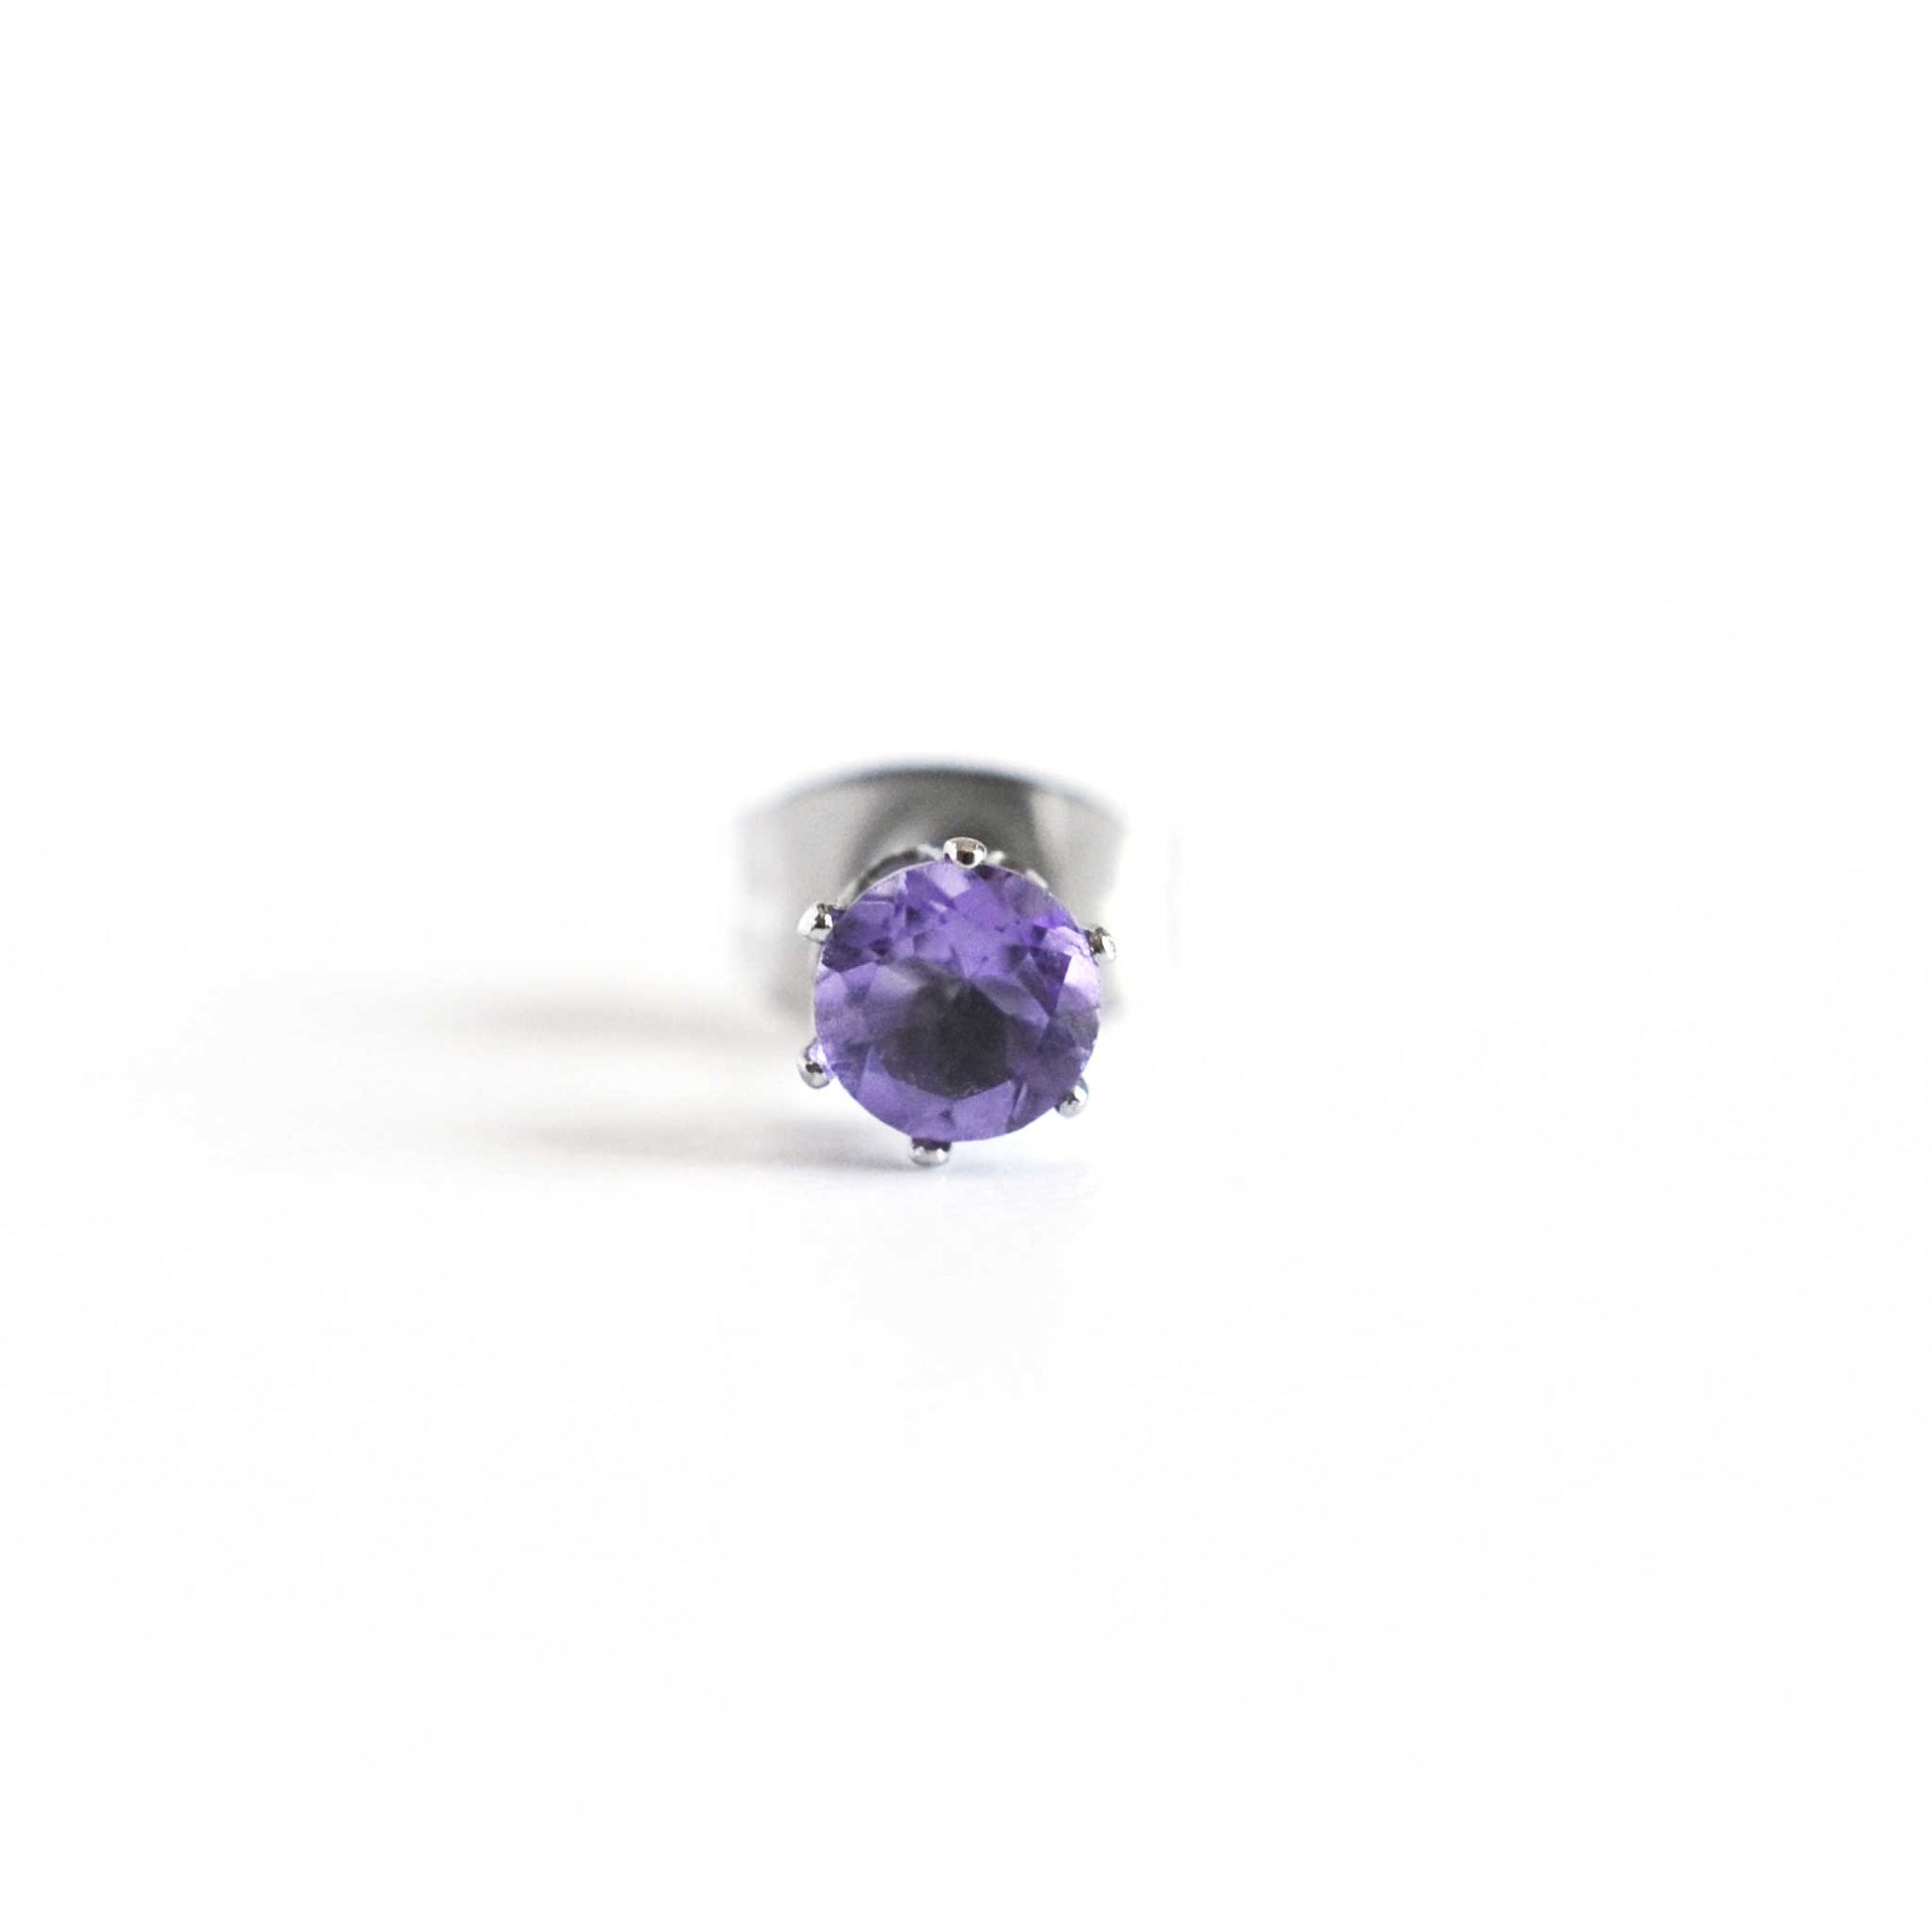 Front view of purple Amethyst faceted gemstone stud earring on white background